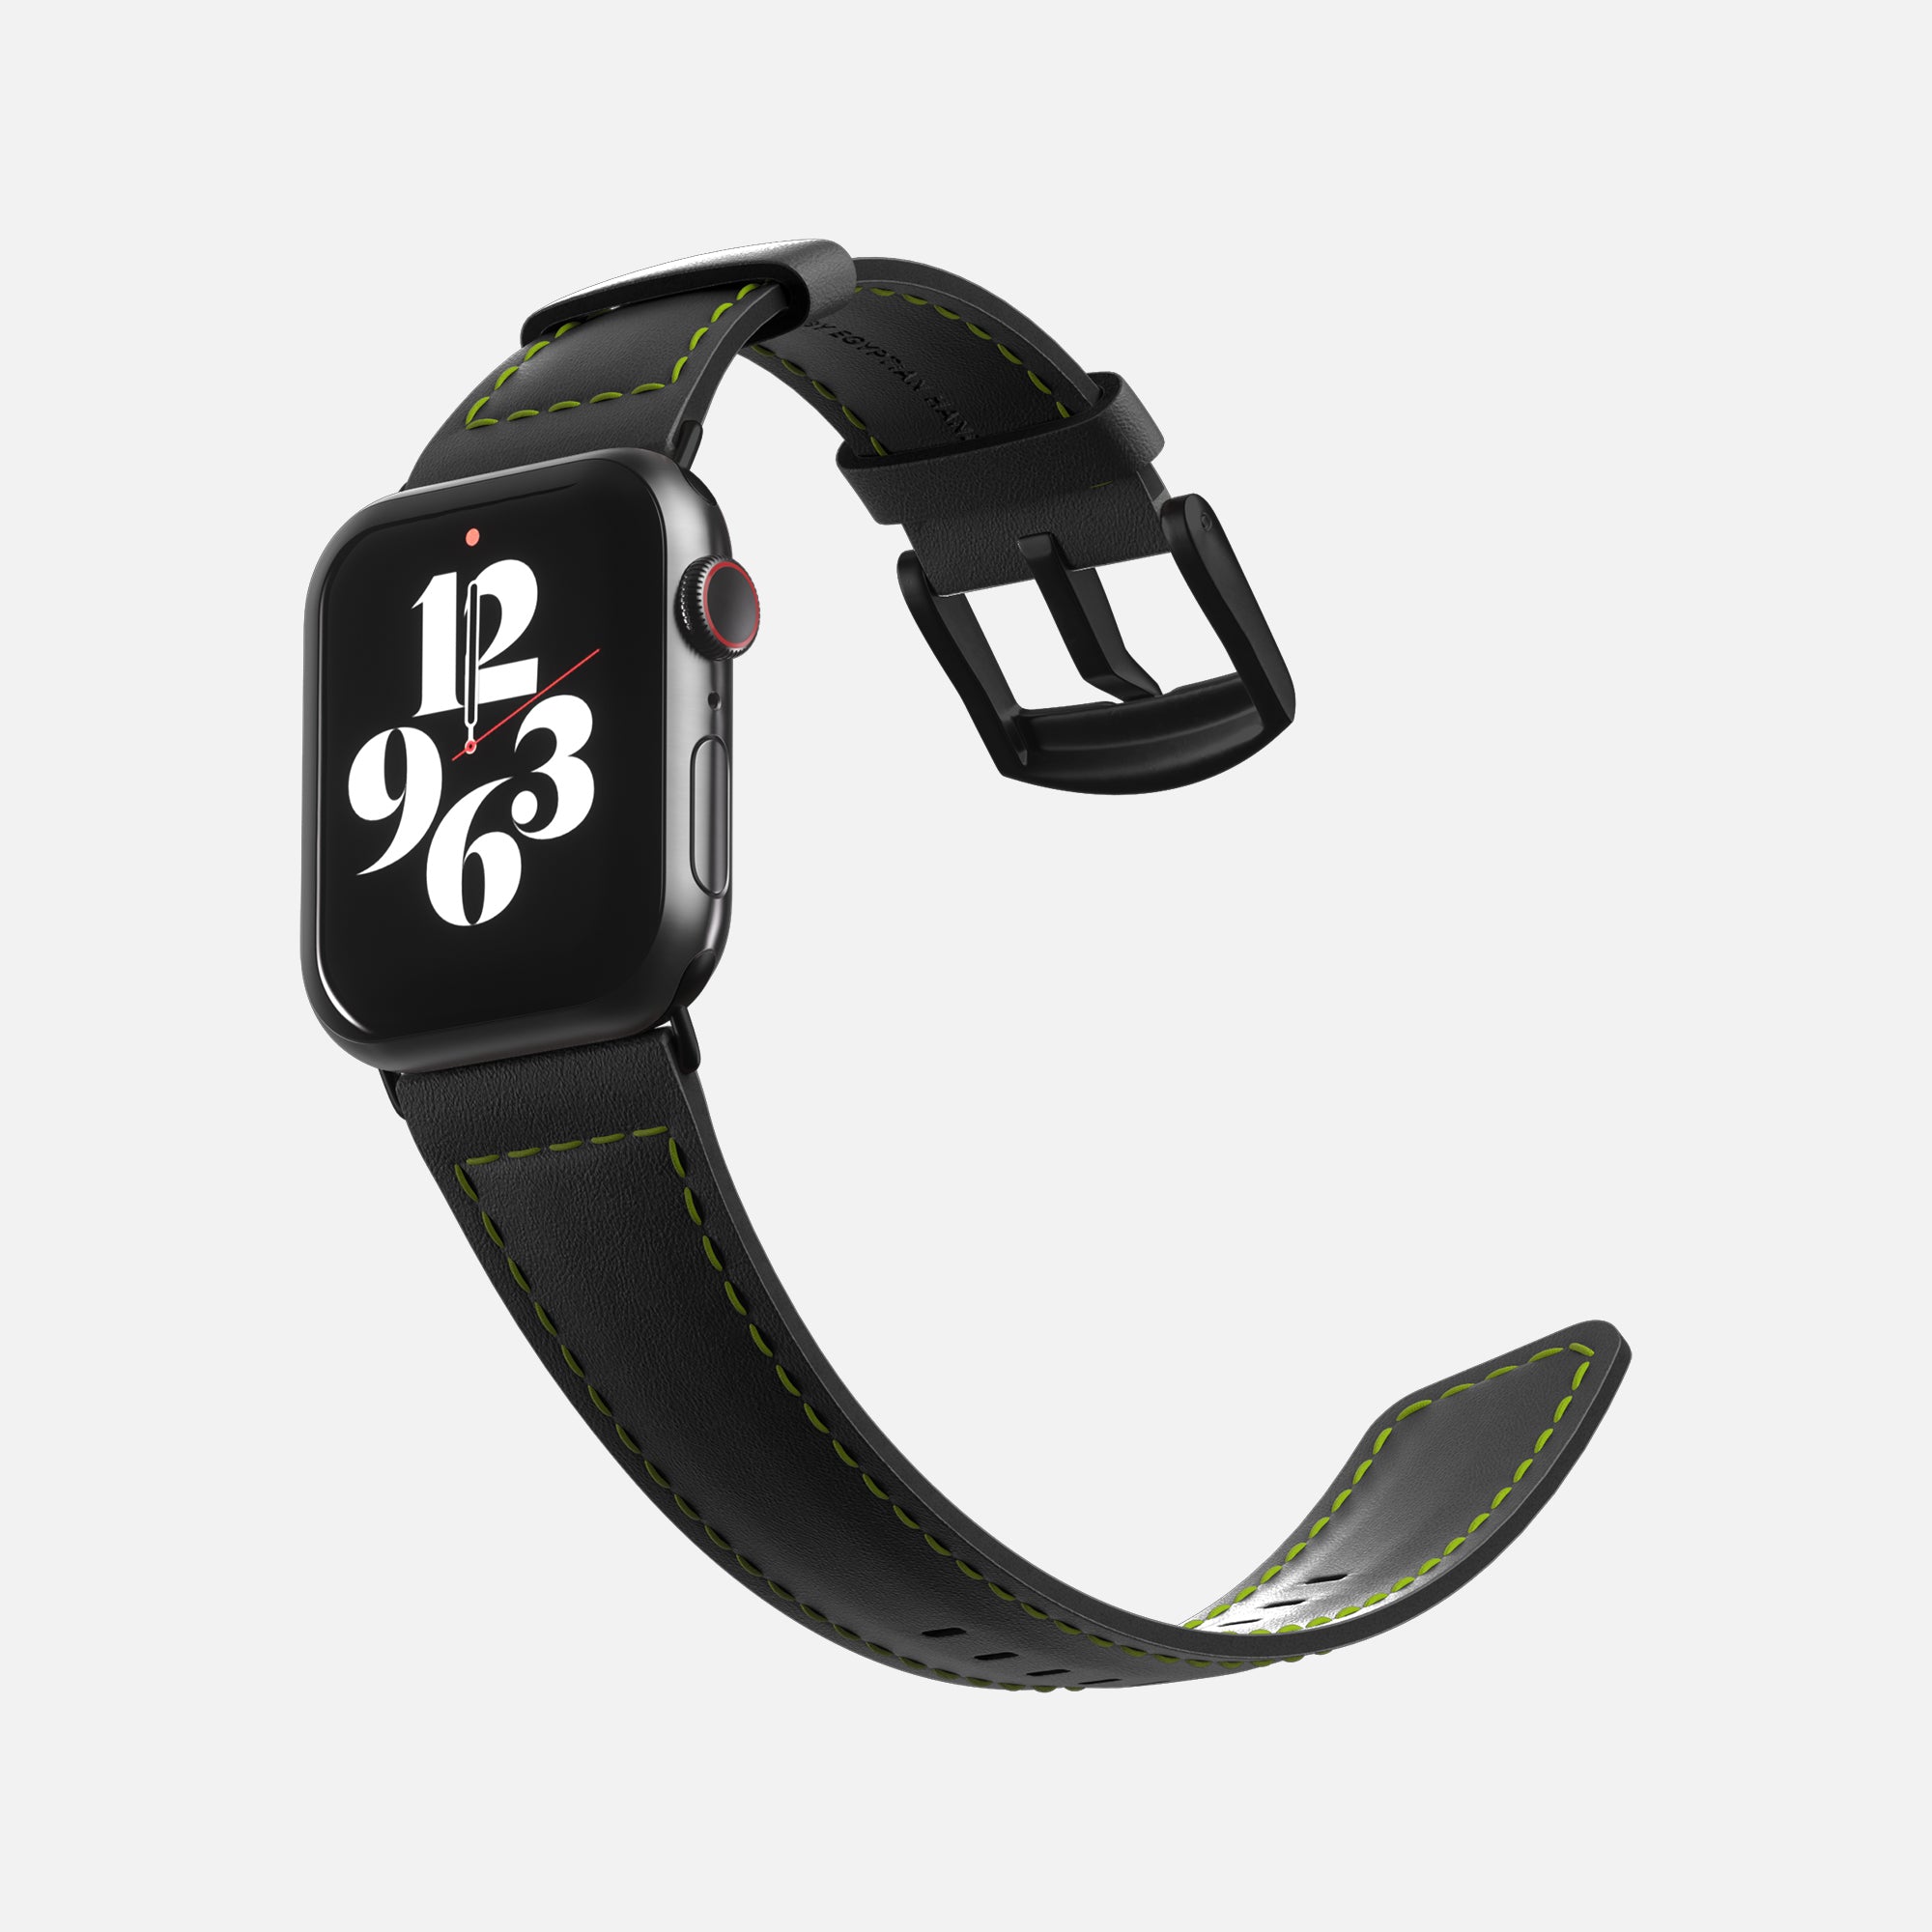 Smartwatch with black sport band and customizable watch face displaying time on a white background.